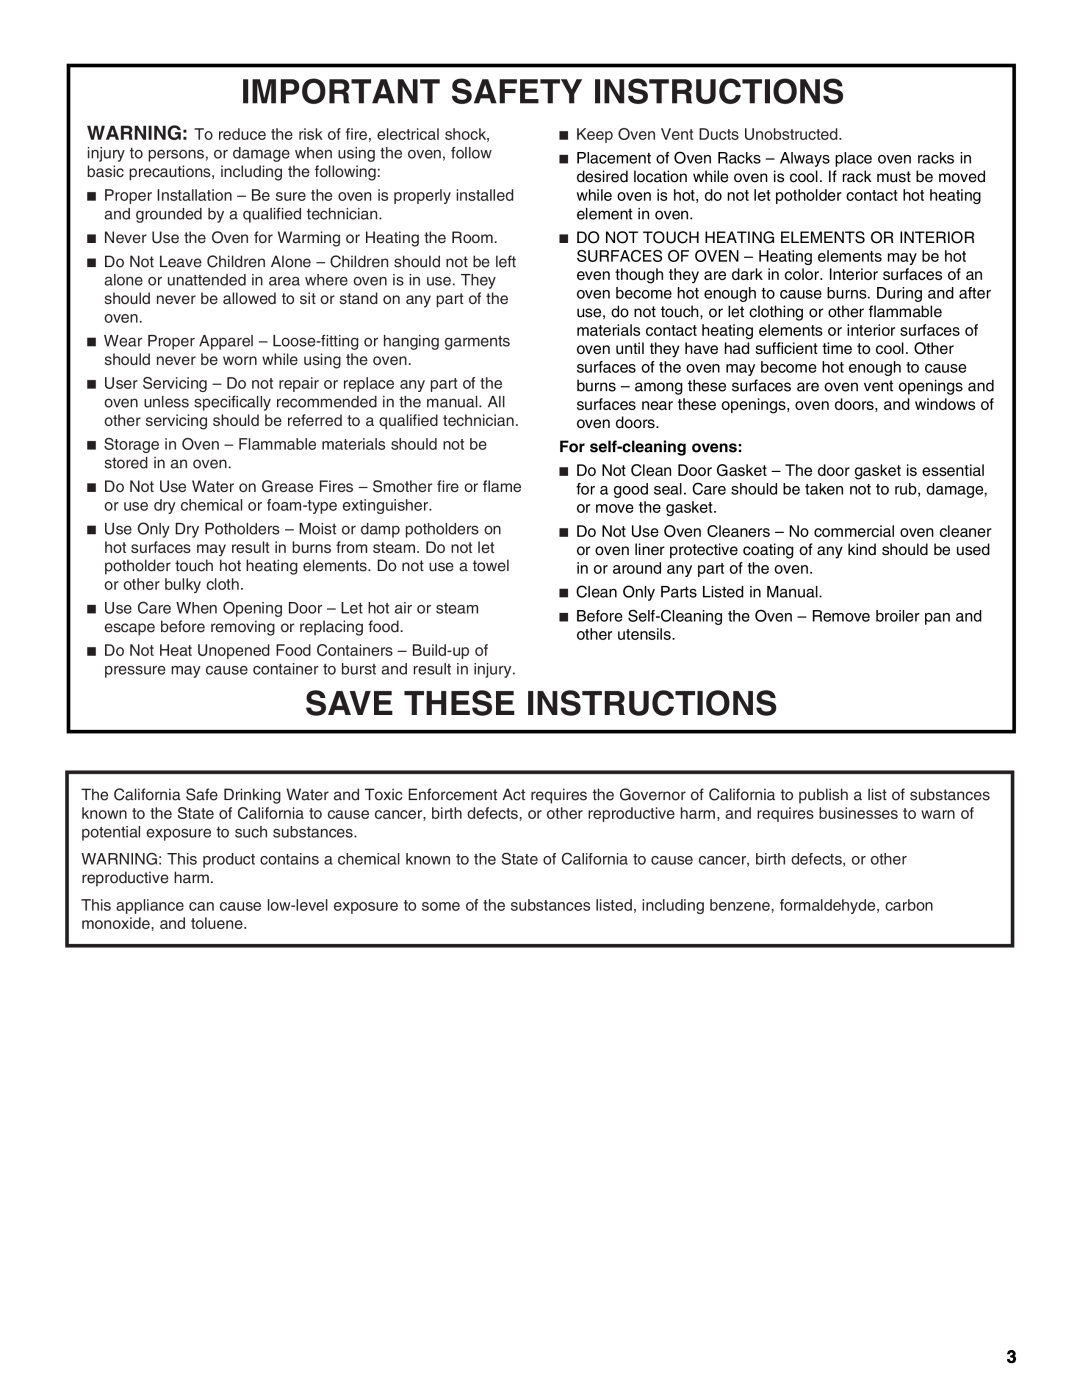 Whirlpool GSC309 manual Important Safety Instructions, Save These Instructions, For self-cleaning ovens 